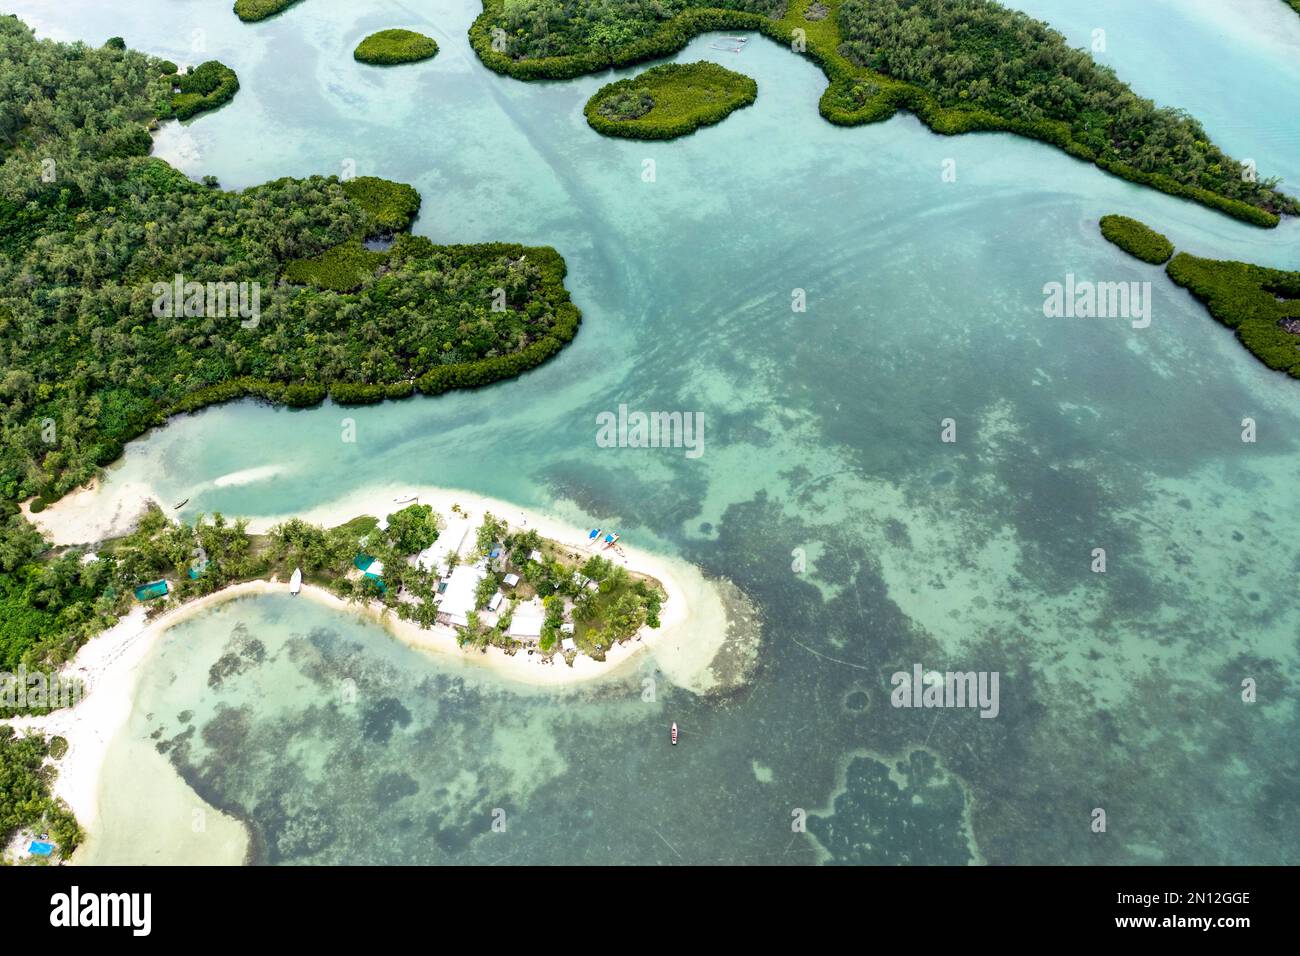 Aerial view, bay at Grand Port, il aux Cerfs with coves sandbanks, and water sports, Flacq, Mauritius, Africa Stock Photo